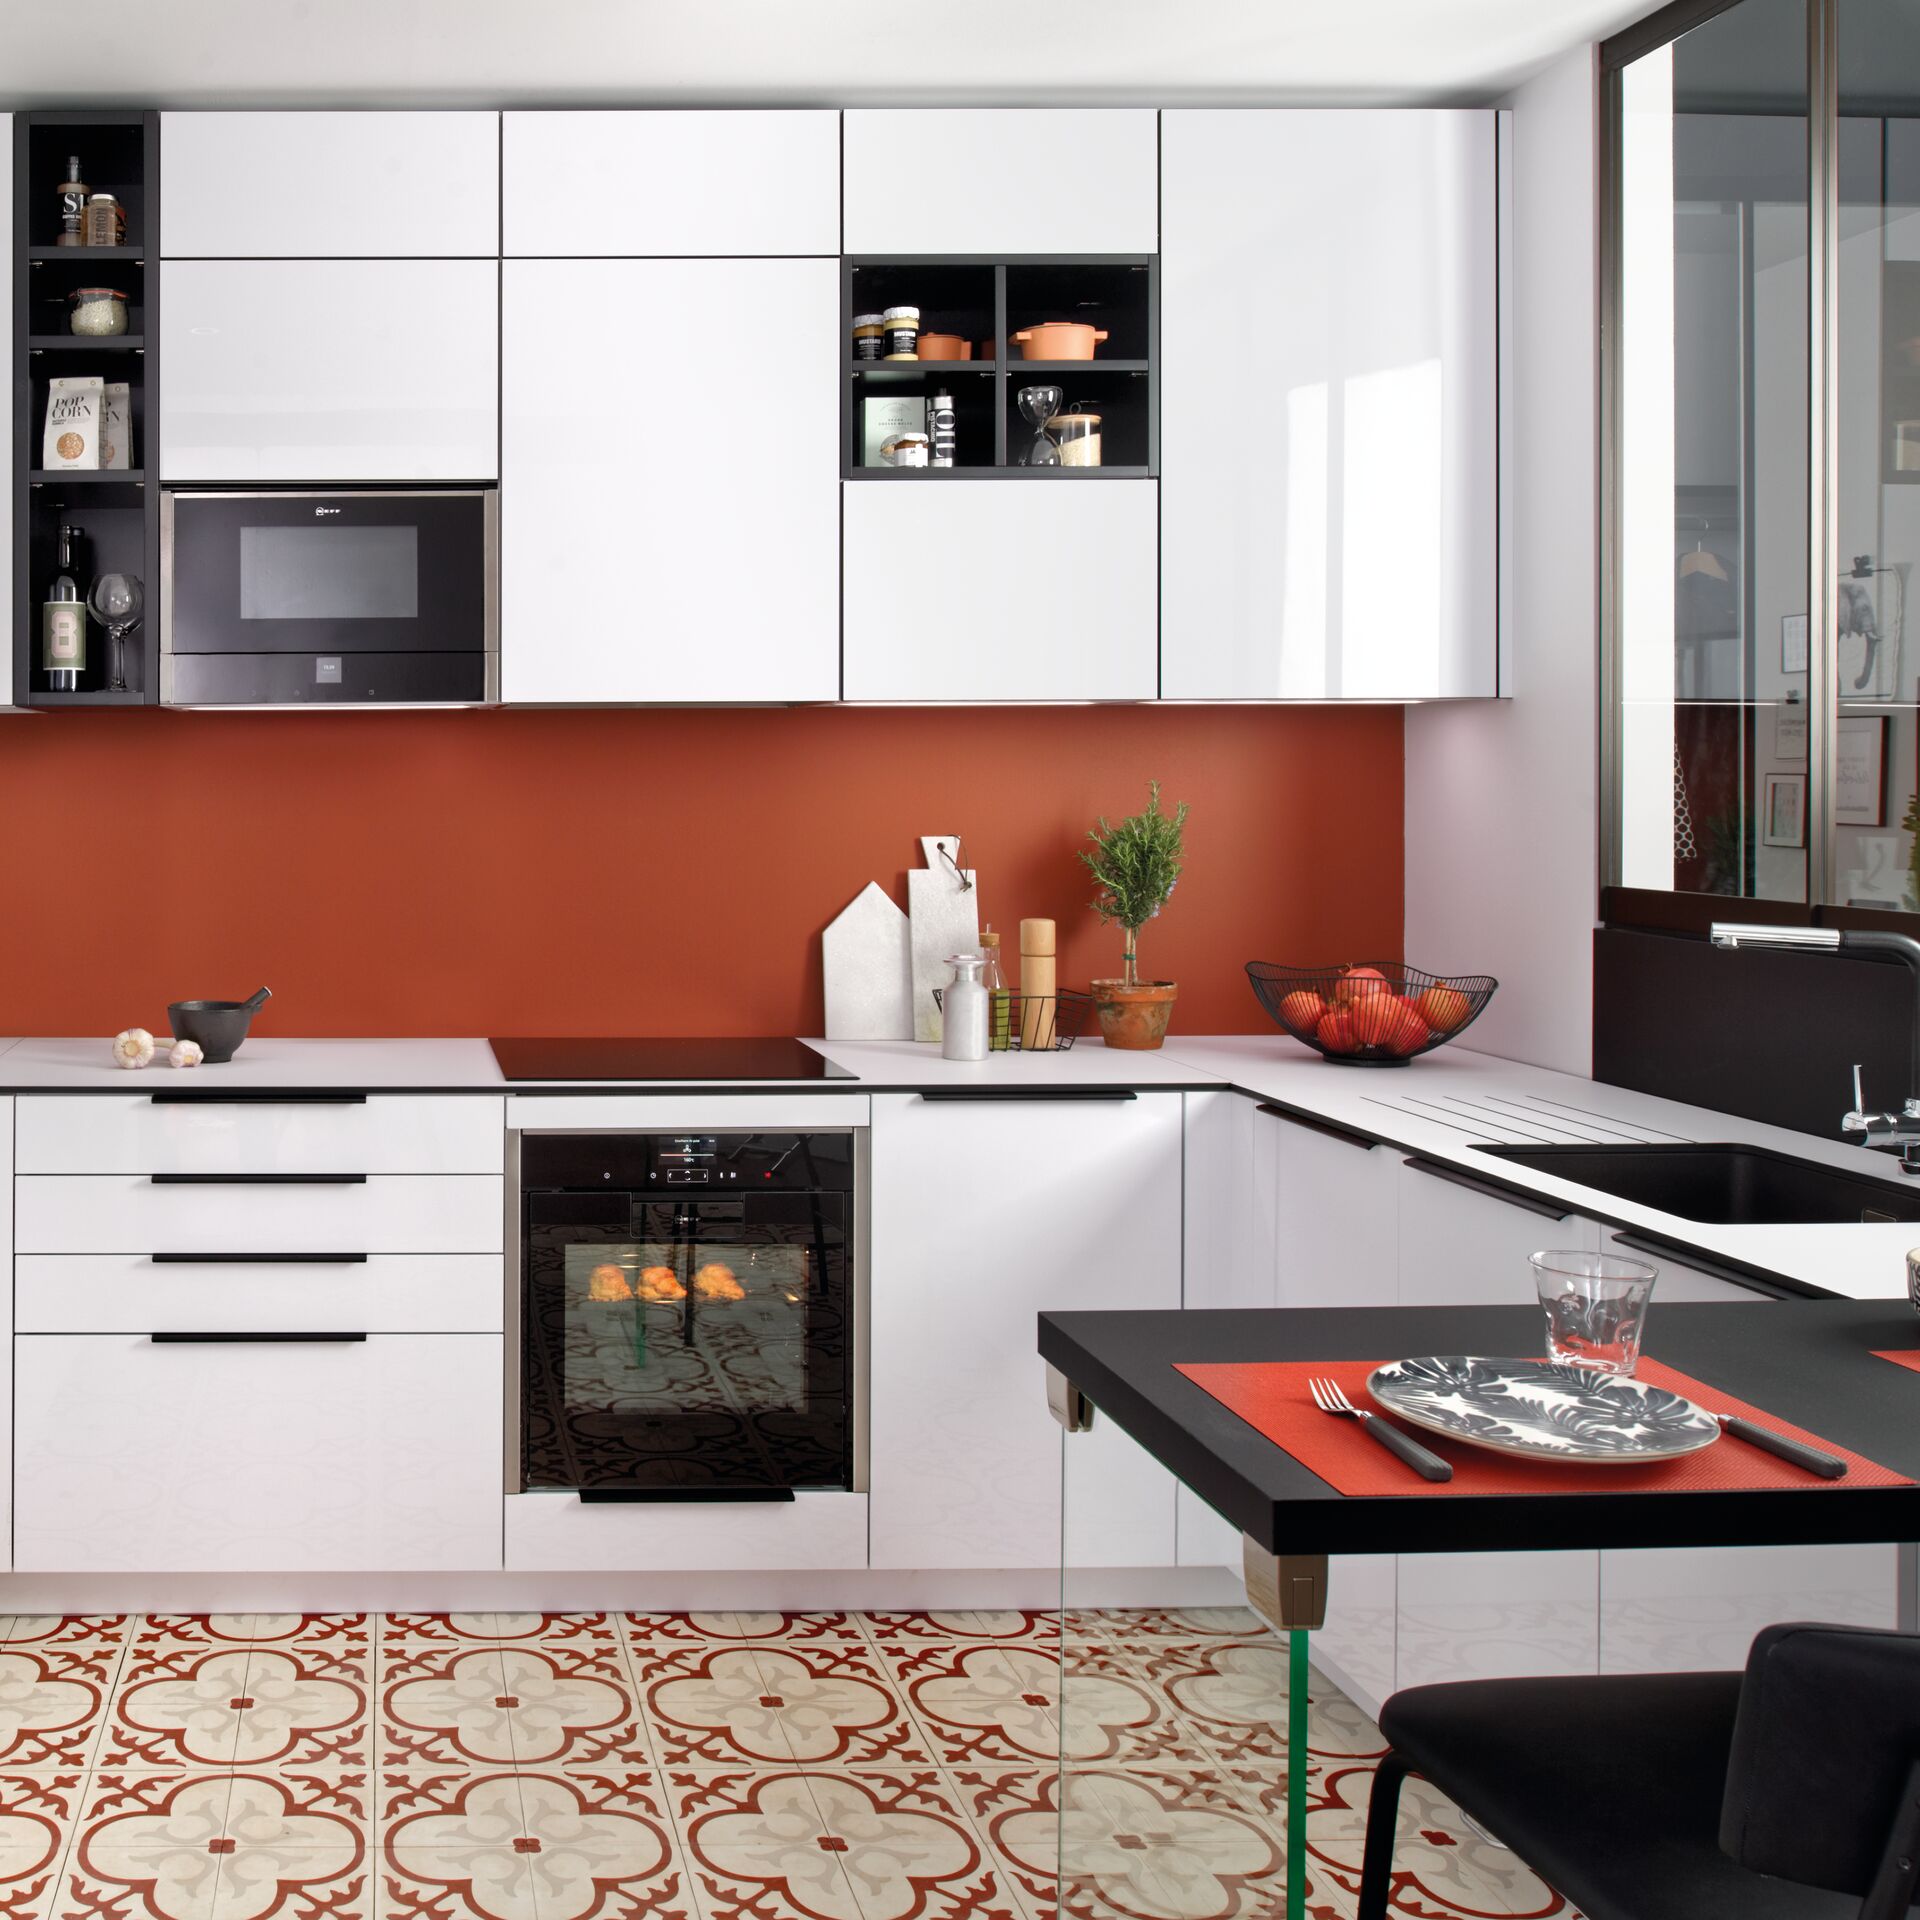 Wall units to fit your kitchen’s nooks and crannies.